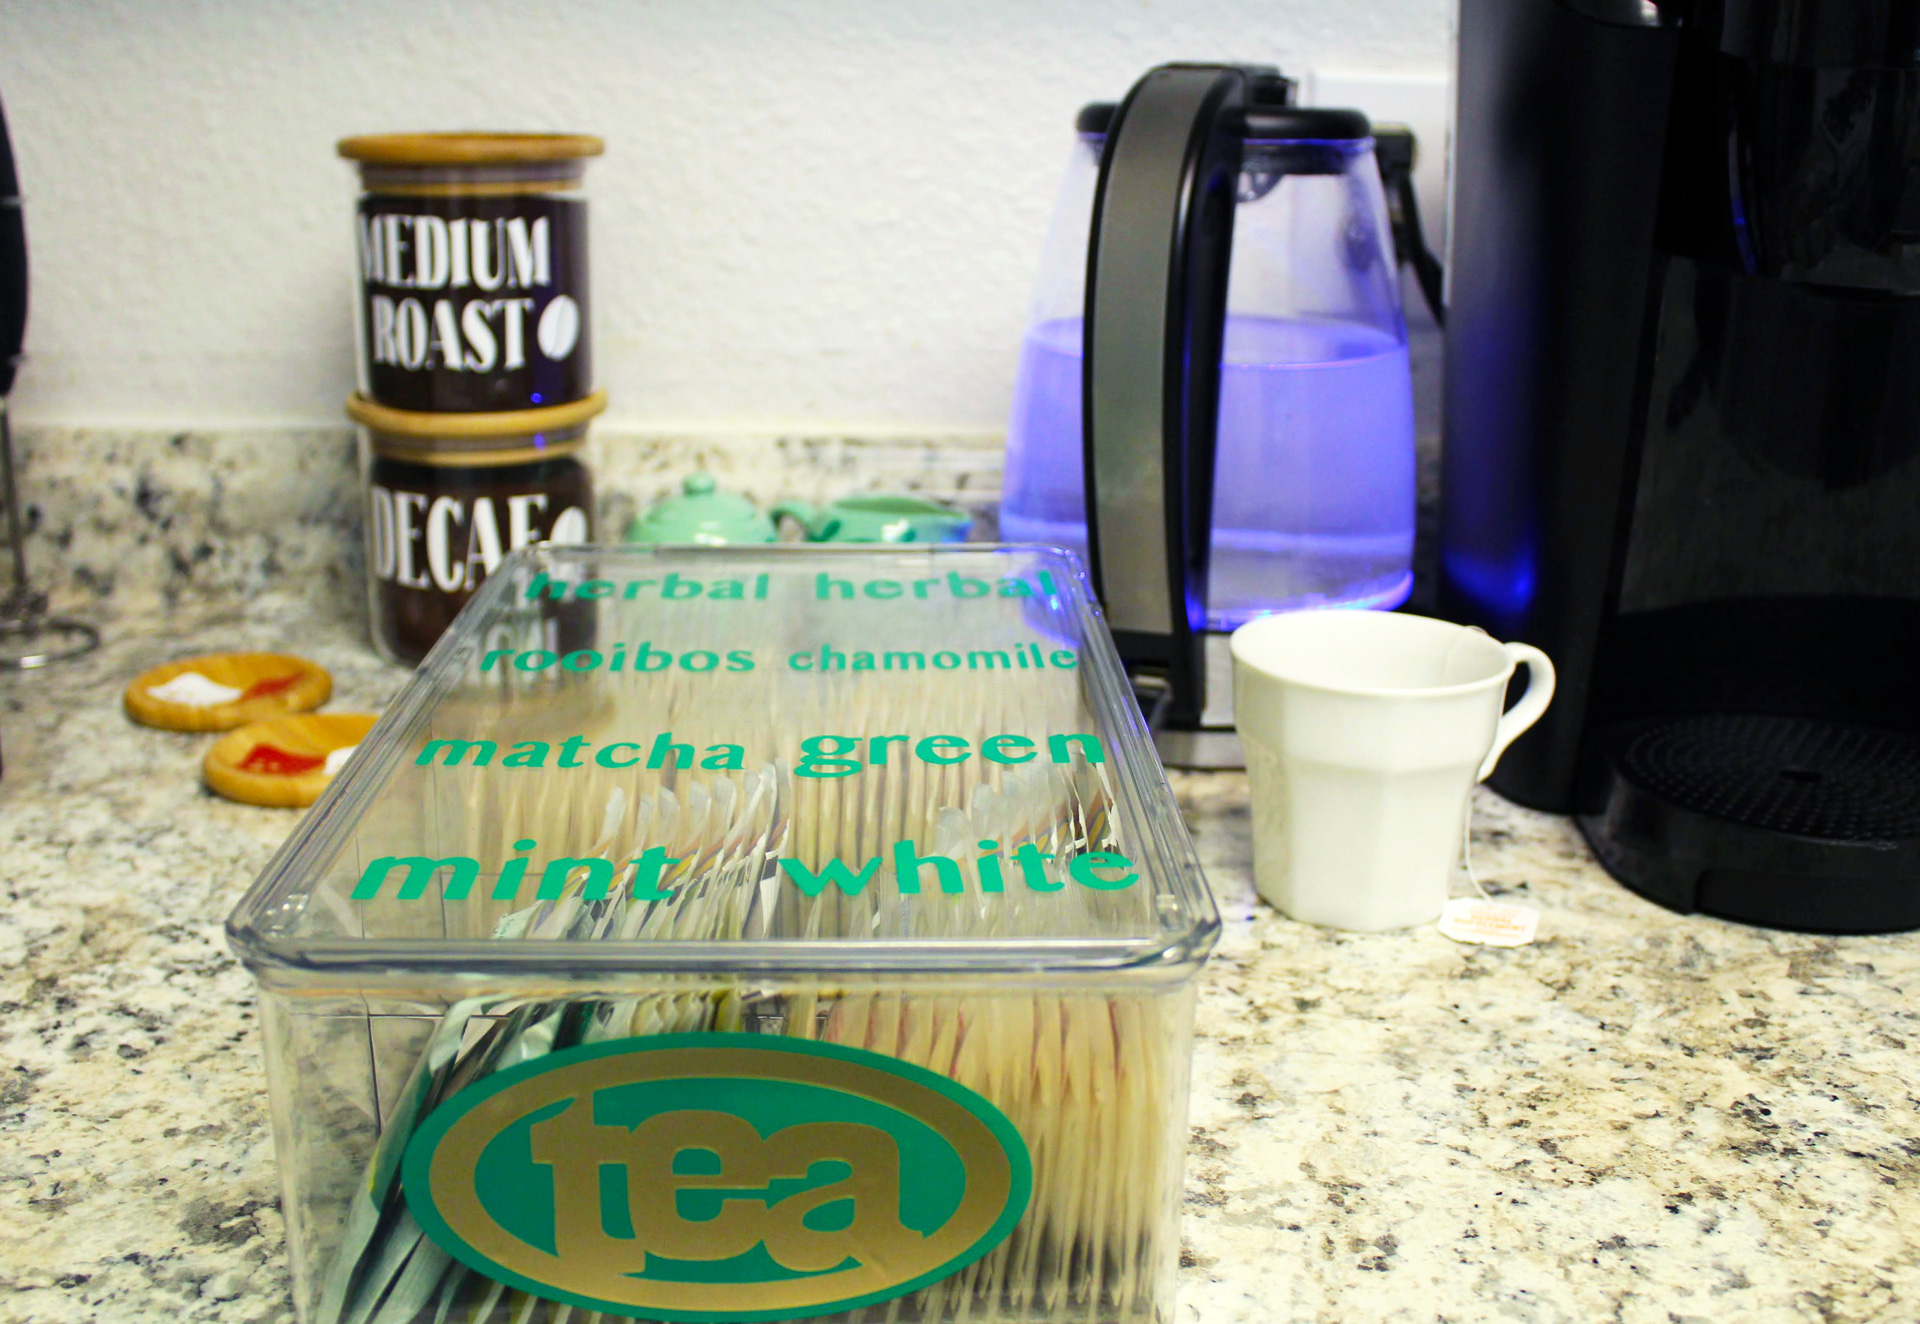 Make your own home café with this DIY coffee and tea bar